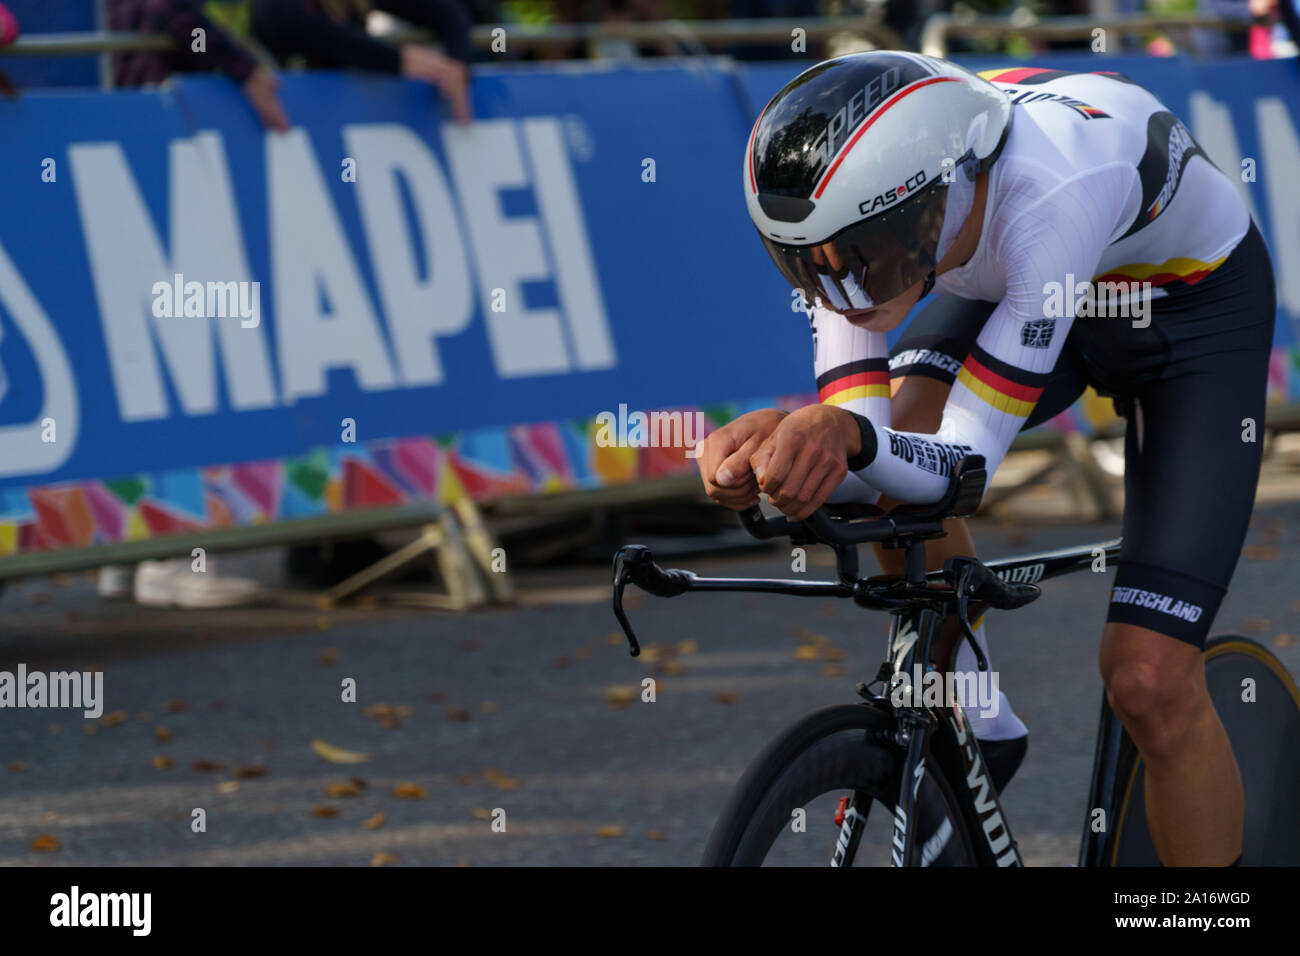 German Cyclist competing in Men's Junior Individual Time Trial, UCI 2019 Road World Championships, Harrogate, North Yorkshire, England, UK. Stock Photo